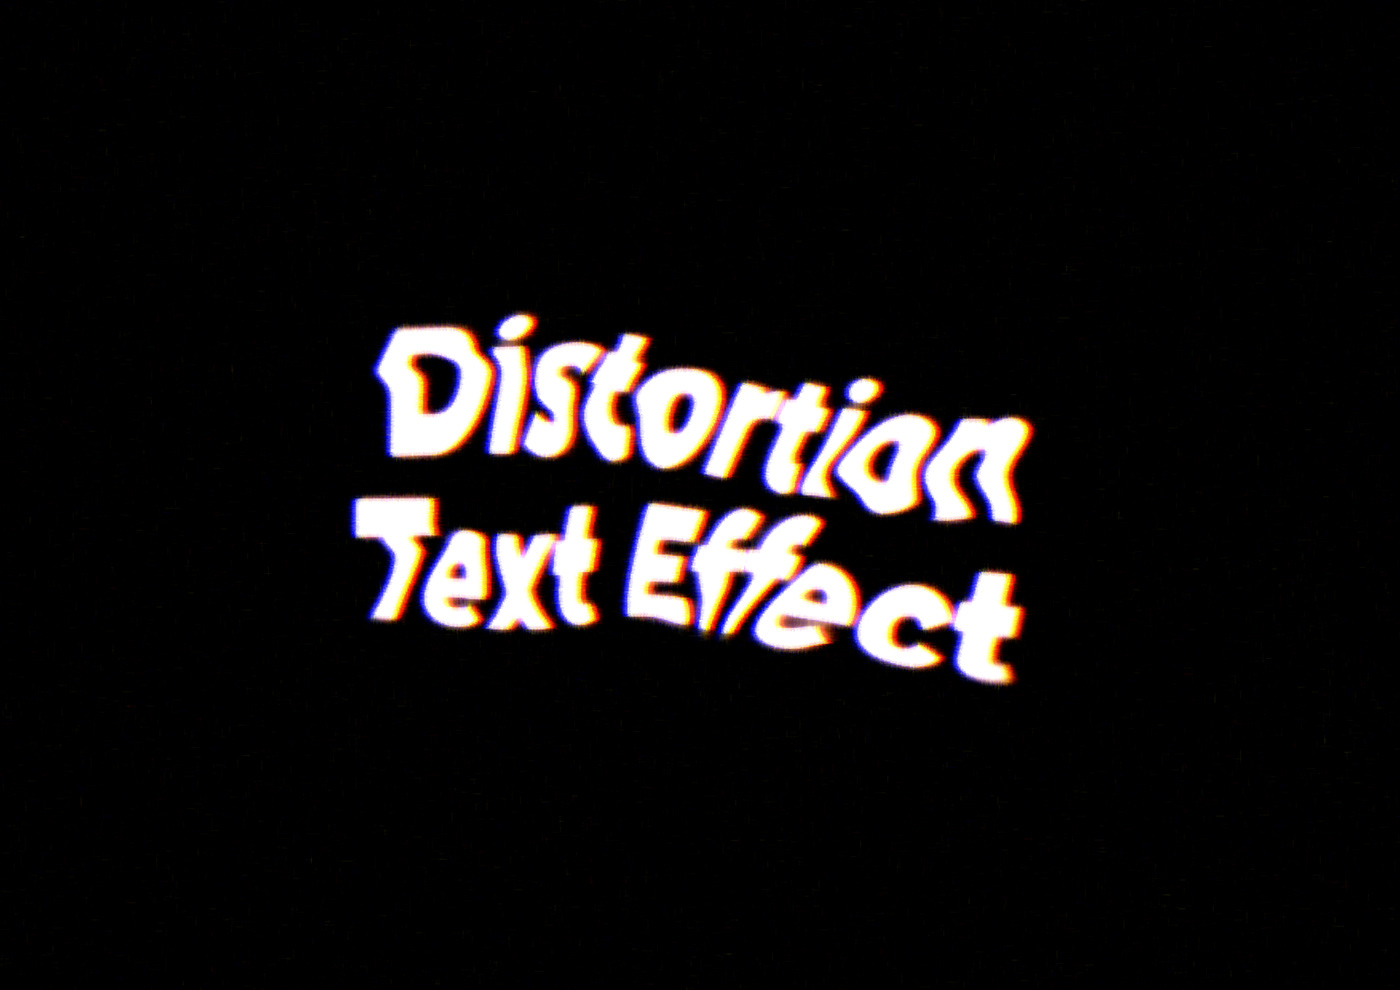 distortion text effect text effects layers layered free free download download logos Photoshop Text Effect